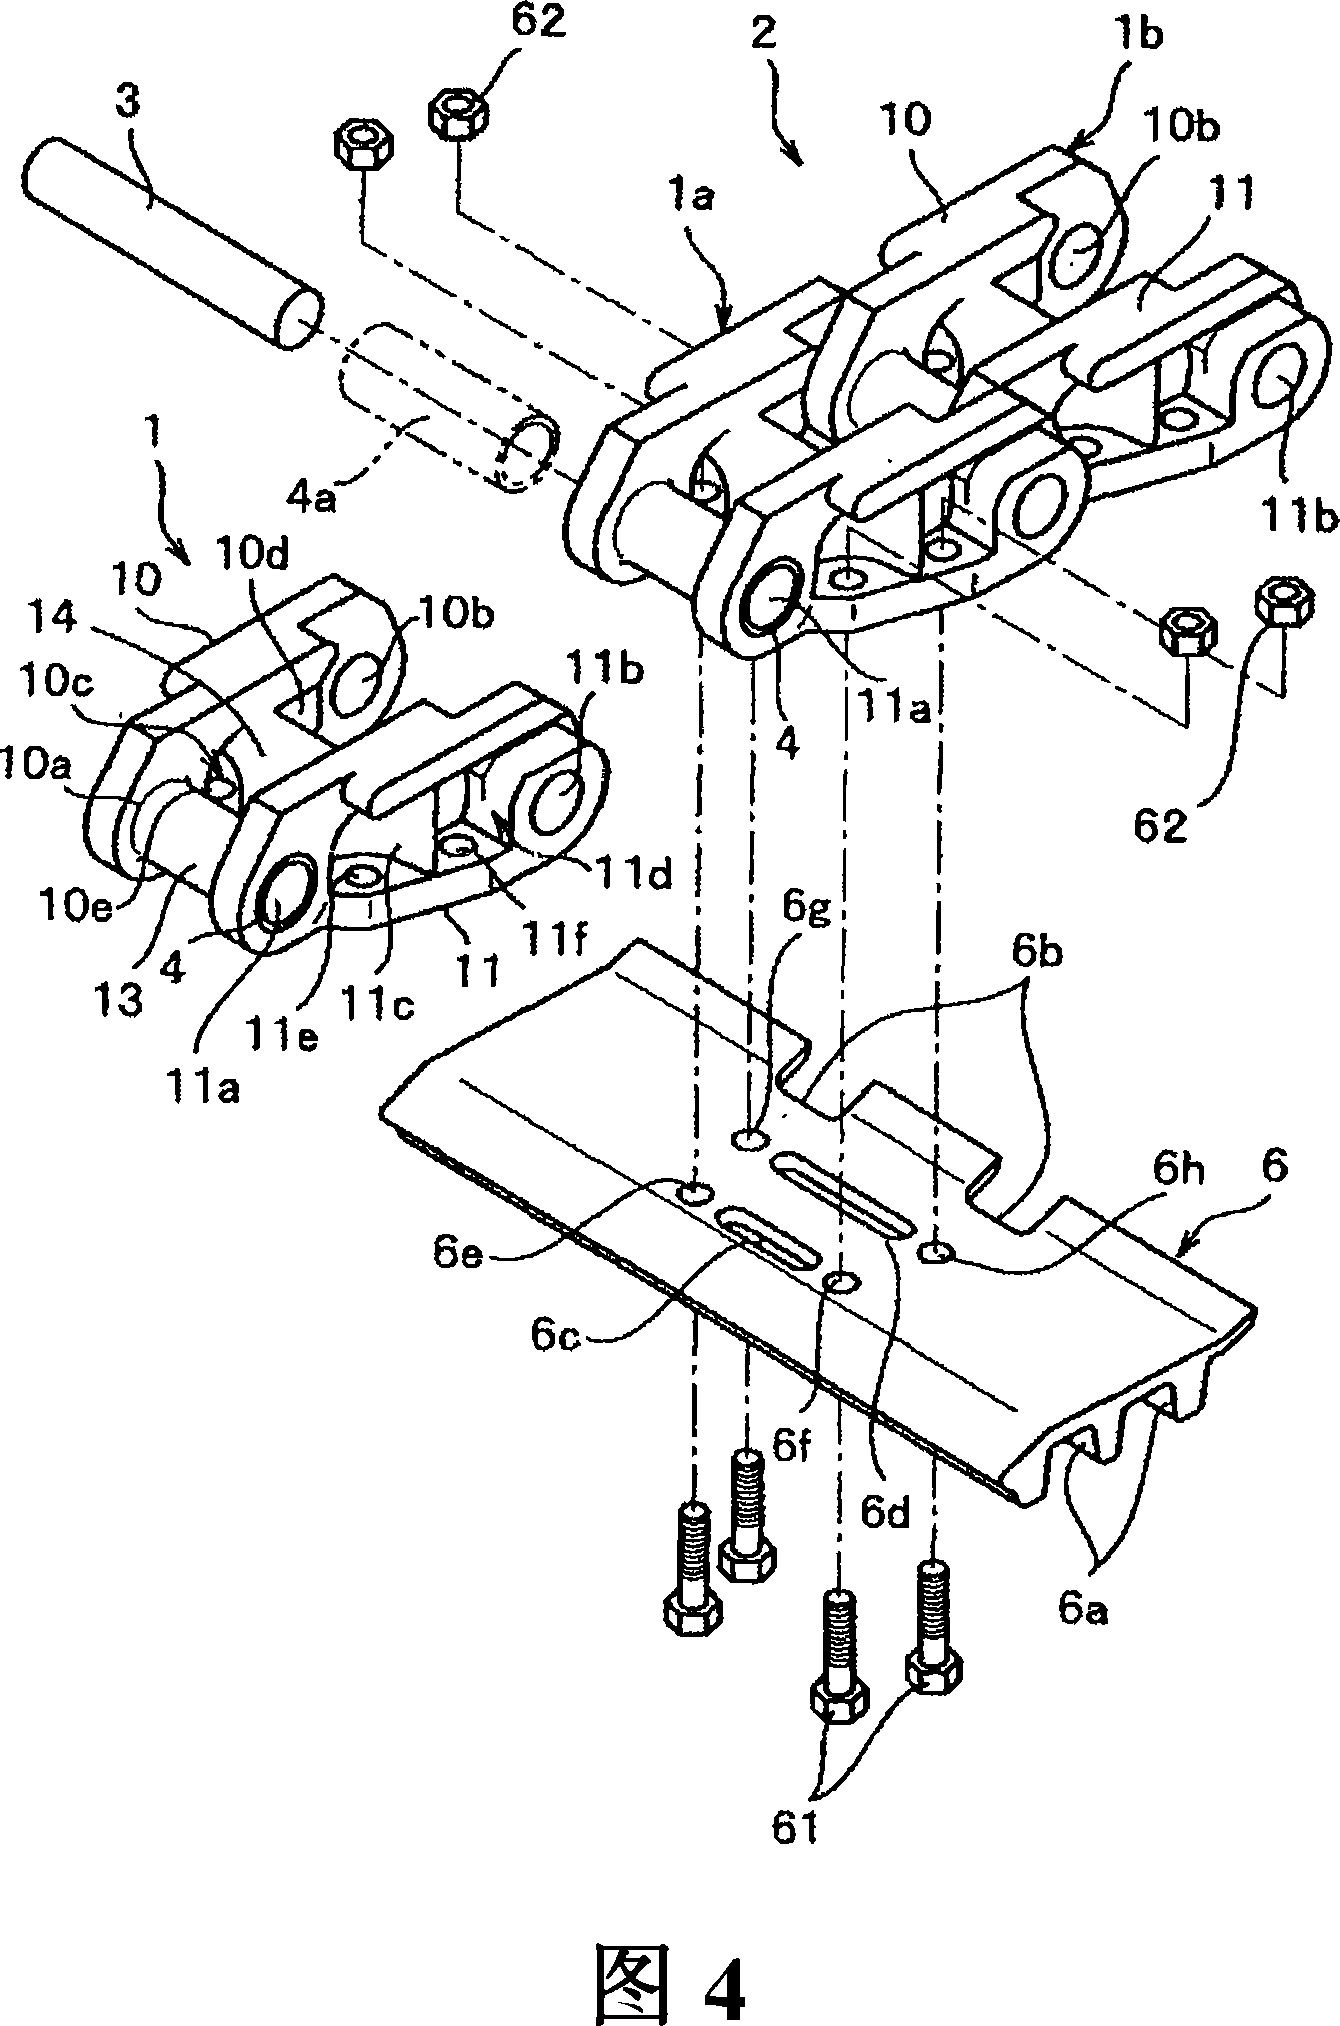 Link structure bodies for track belt and link chain formed by connecting the link structure bodies